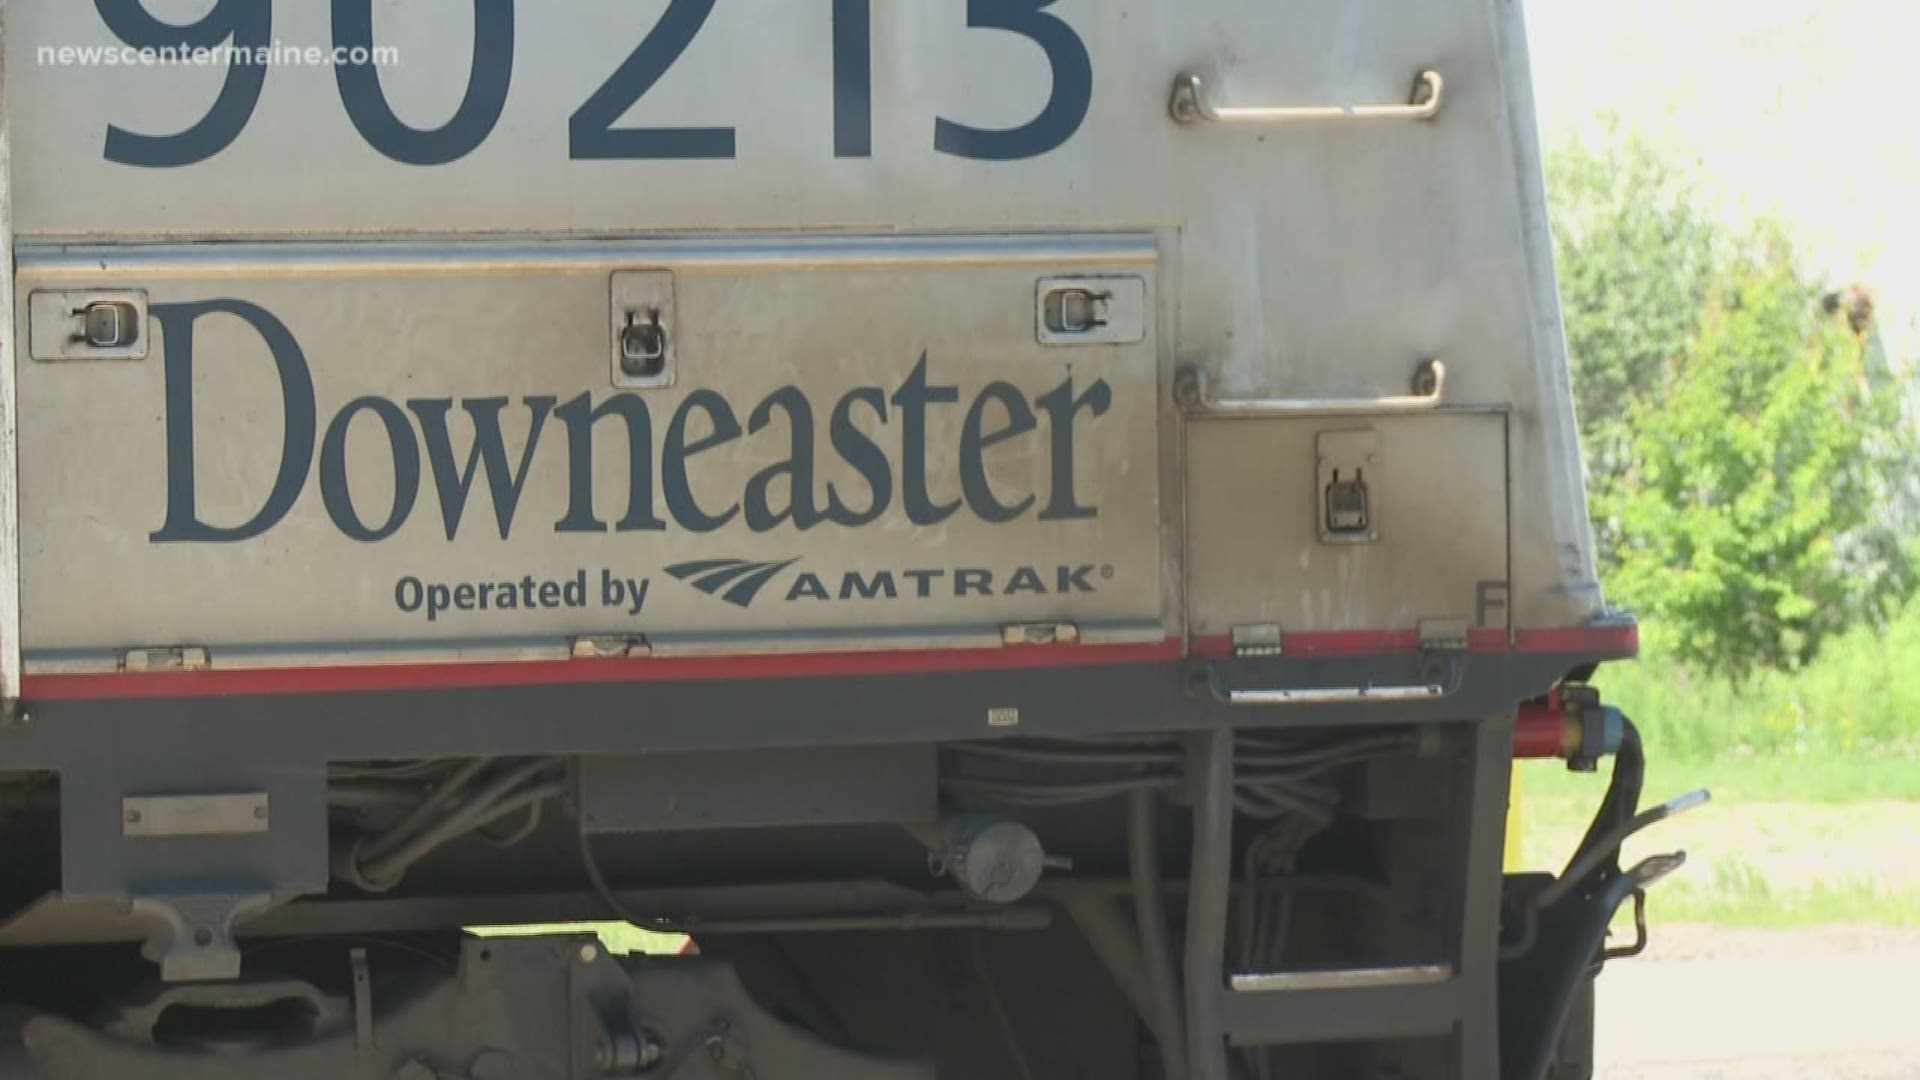 The Amtrak Downeaster makes the trip from Boston to Brunswick five times a day, and ridership is growing monthly.